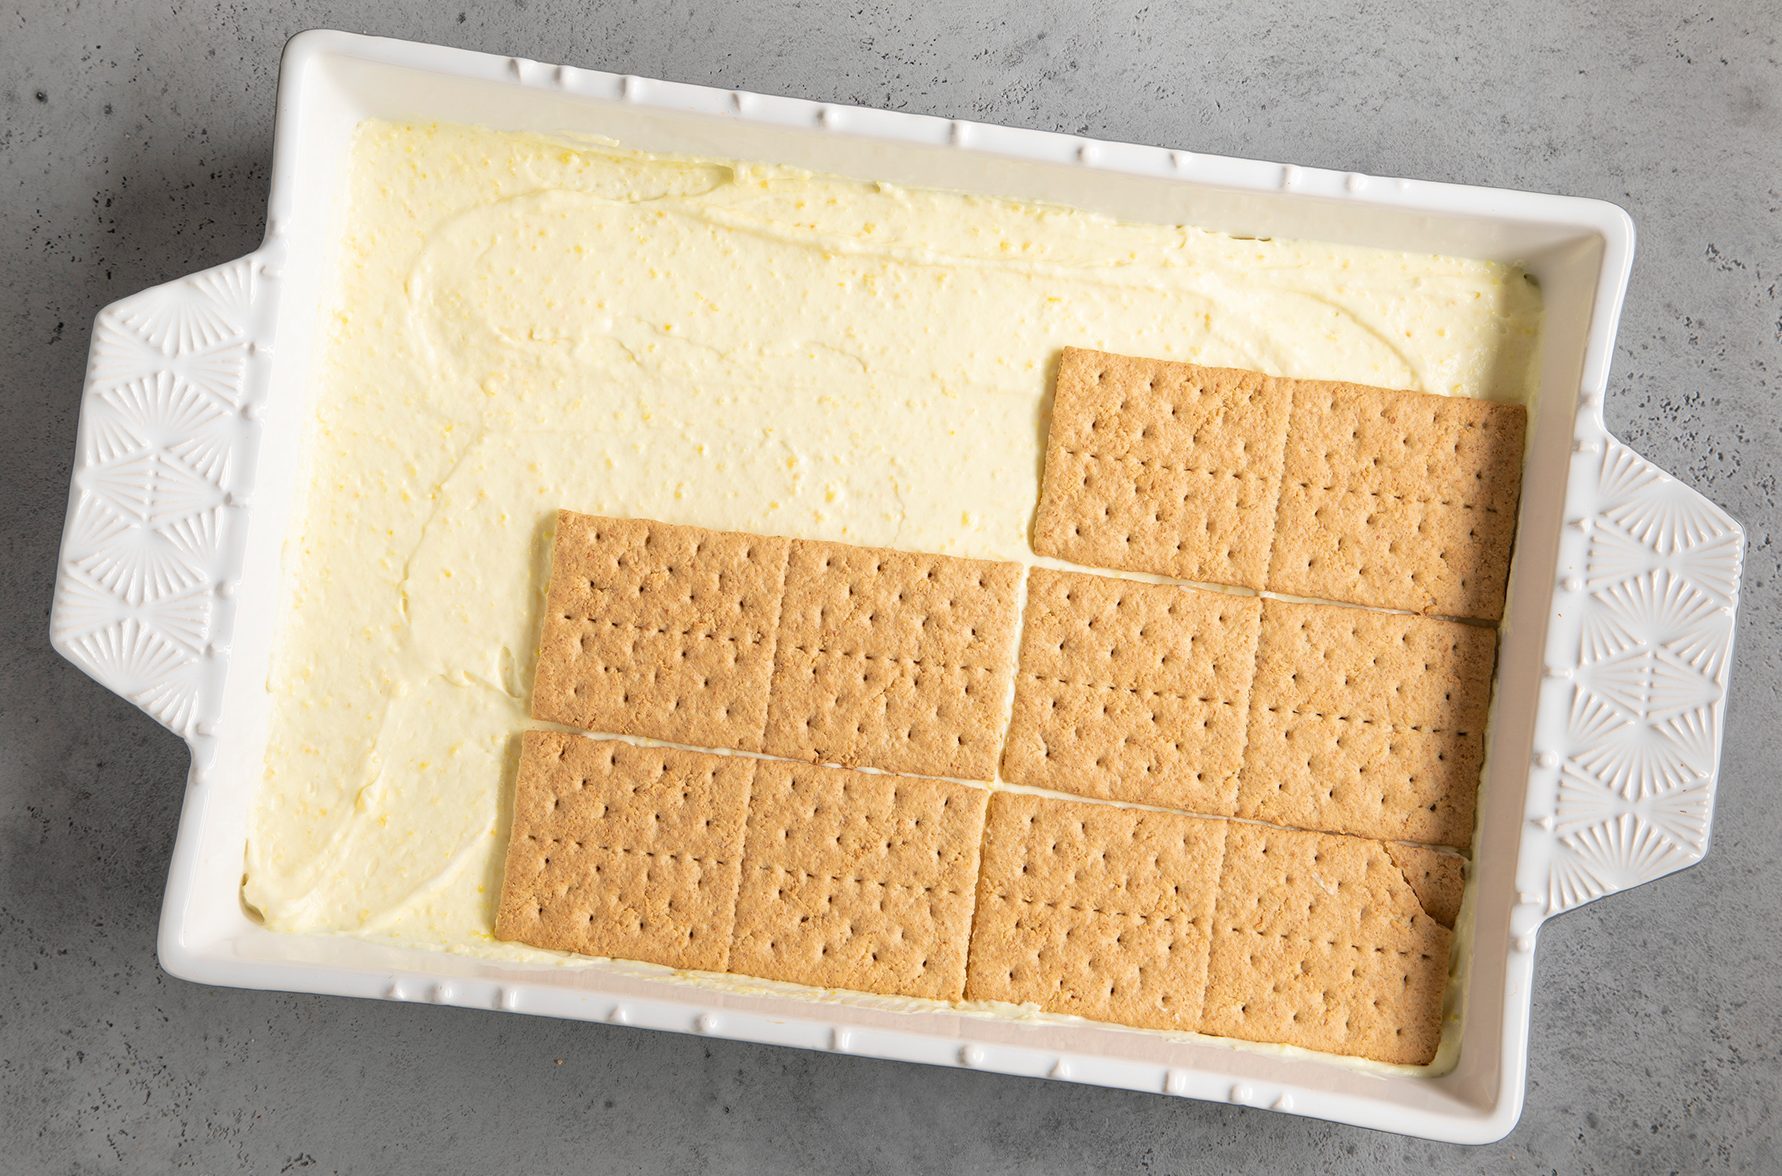 A white rectangular baking dish contains a layer of creamy mixture spread evenly, with rectangular graham crackers placed on top, covering about two-thirds of the dish.